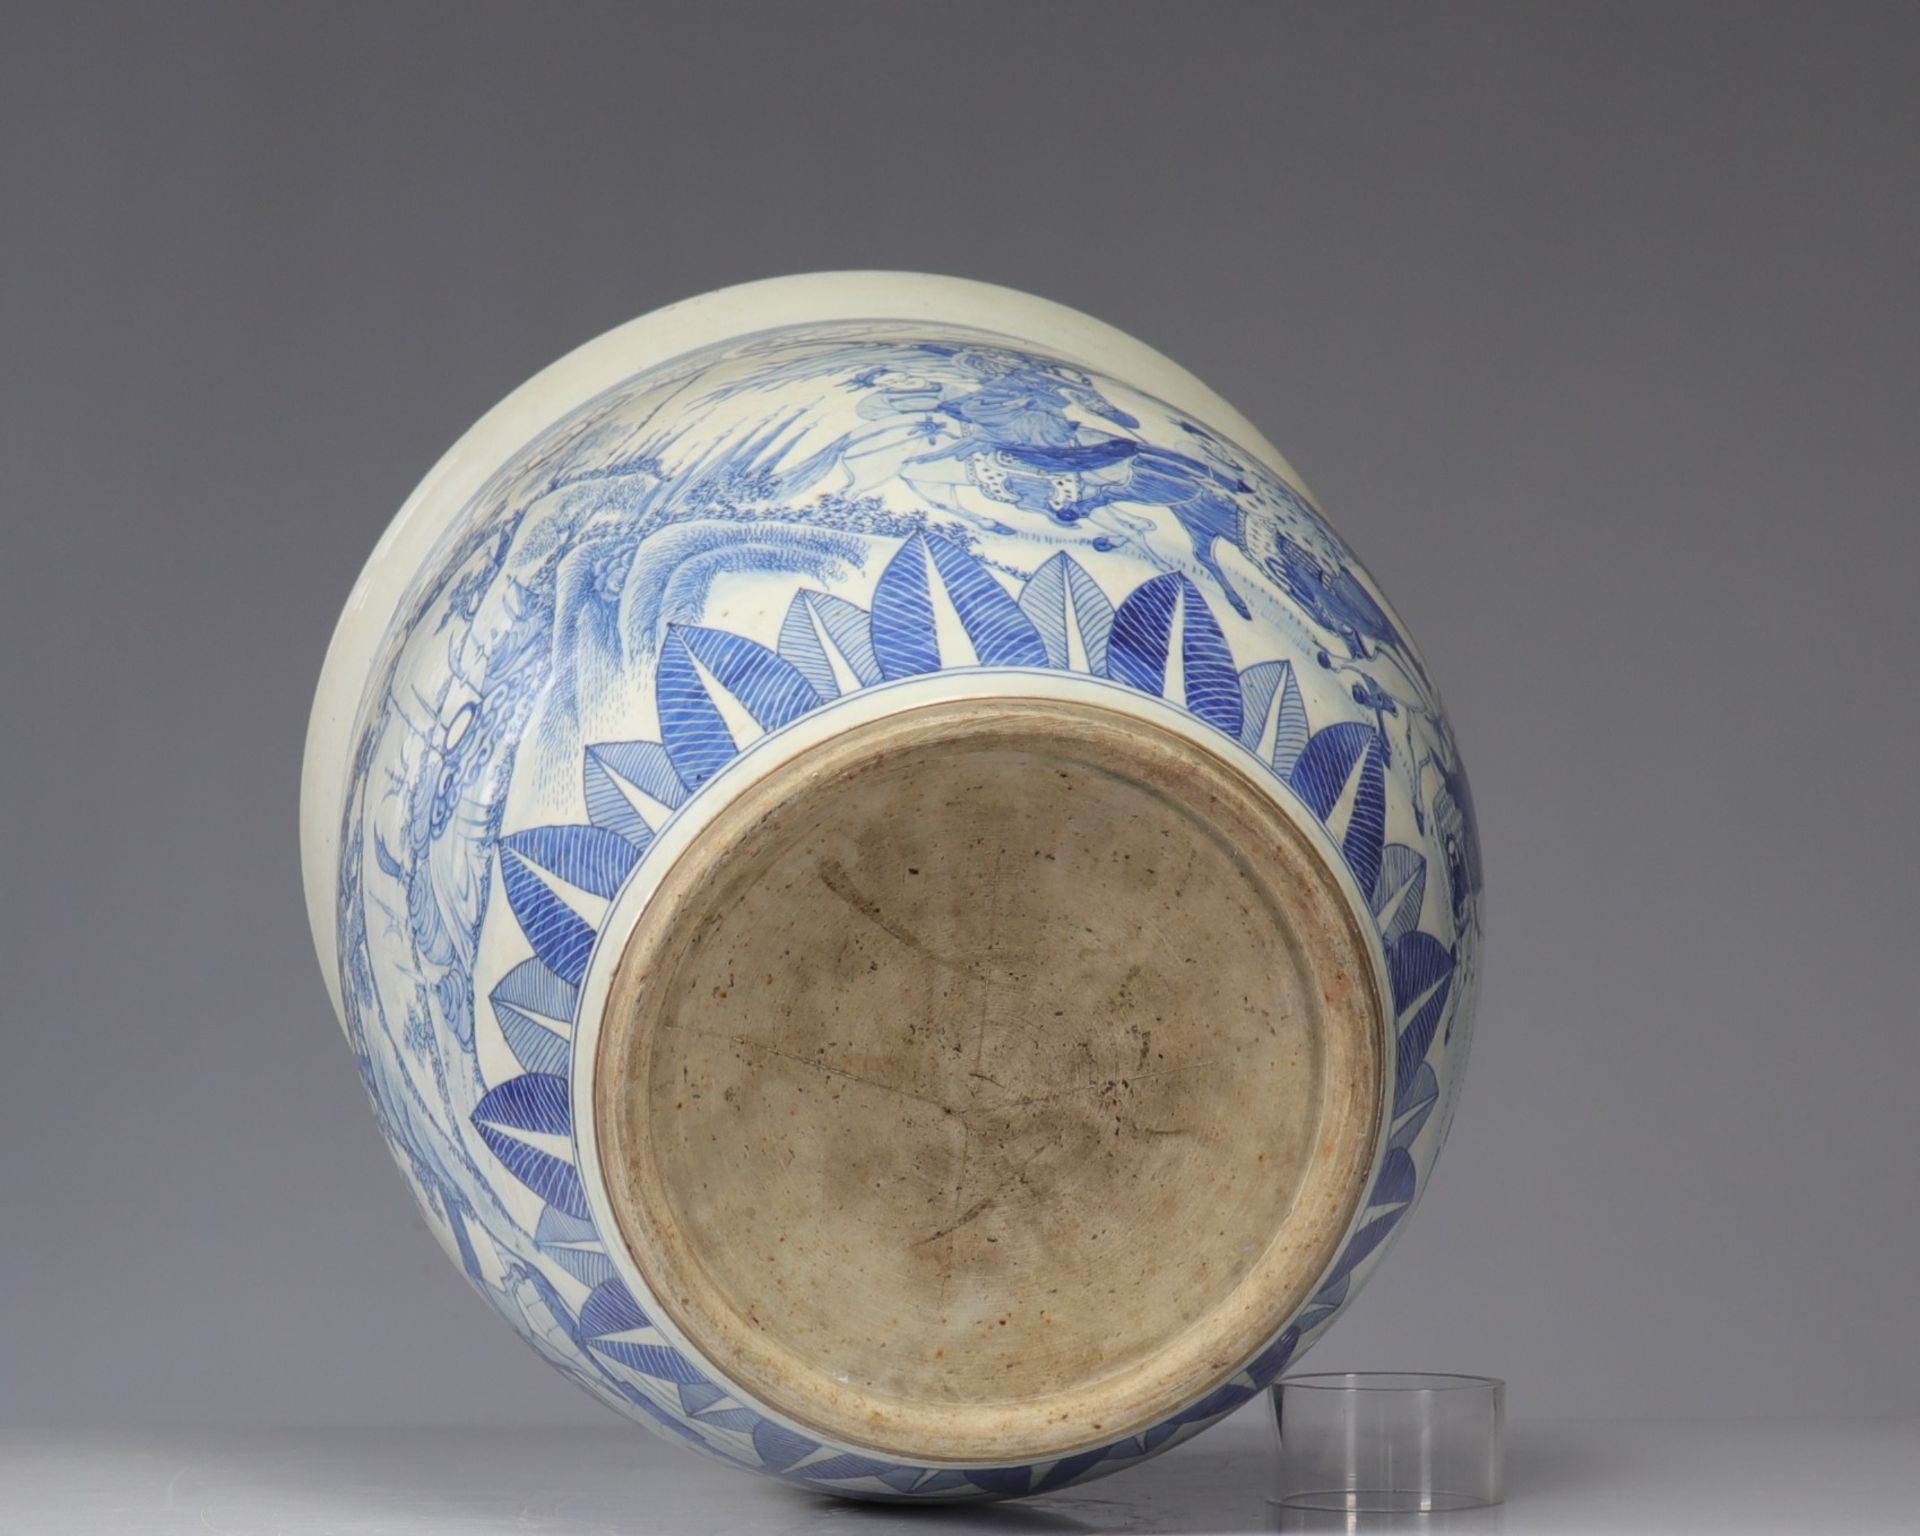 Imposing blue-white porcelain vase decorated with Qing period warriors - Image 6 of 6